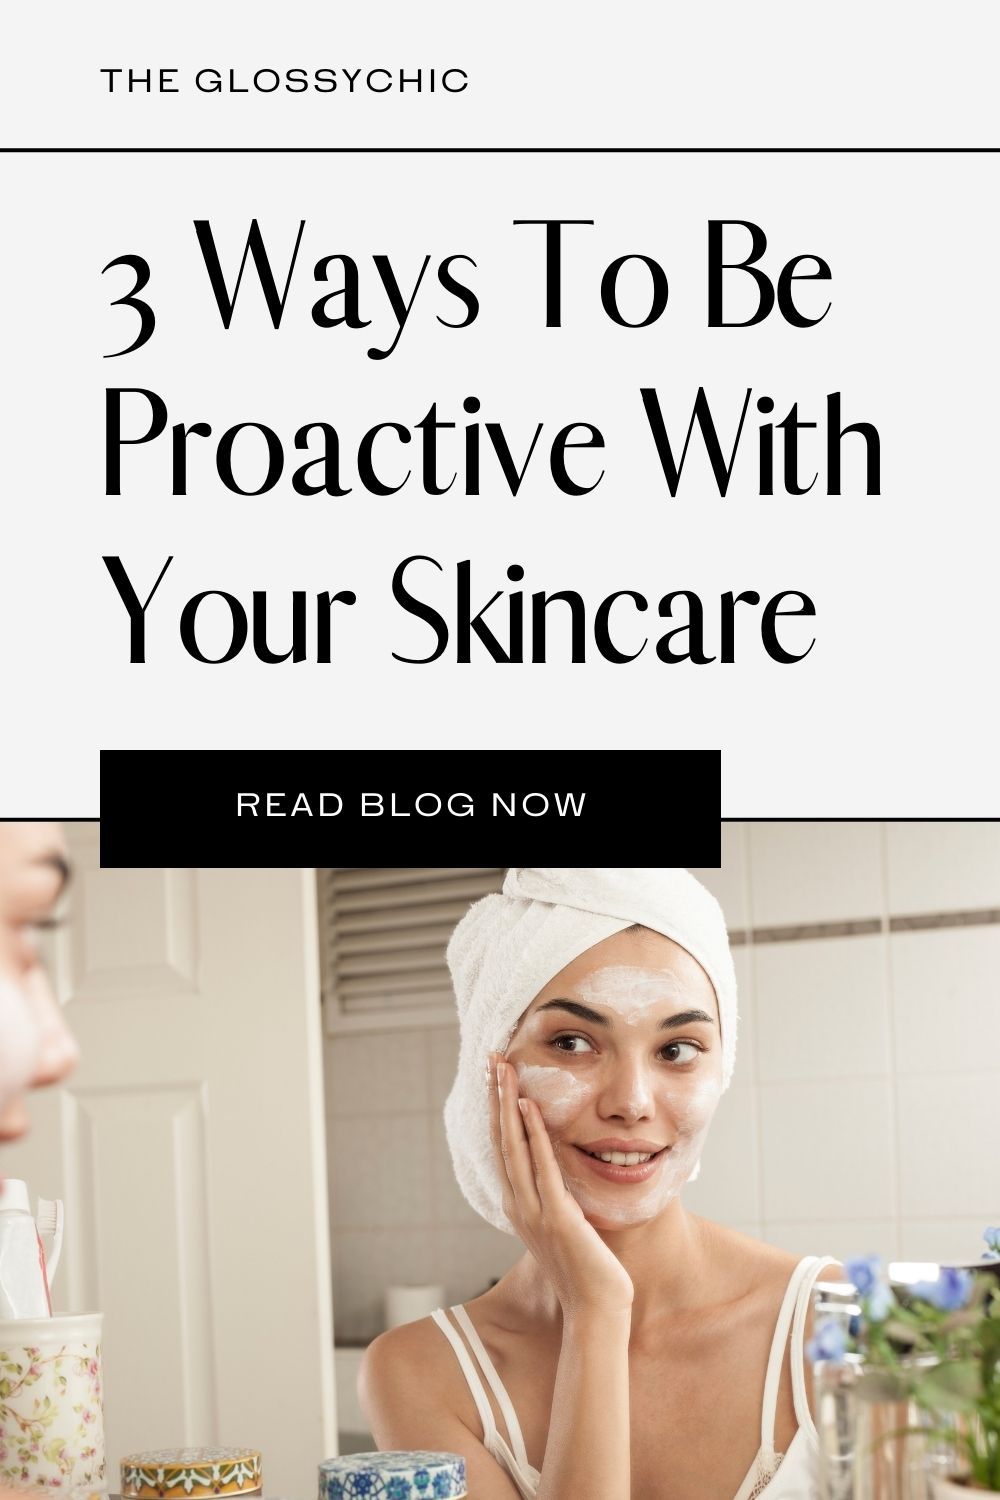 3 ways to be proactive with your skincare